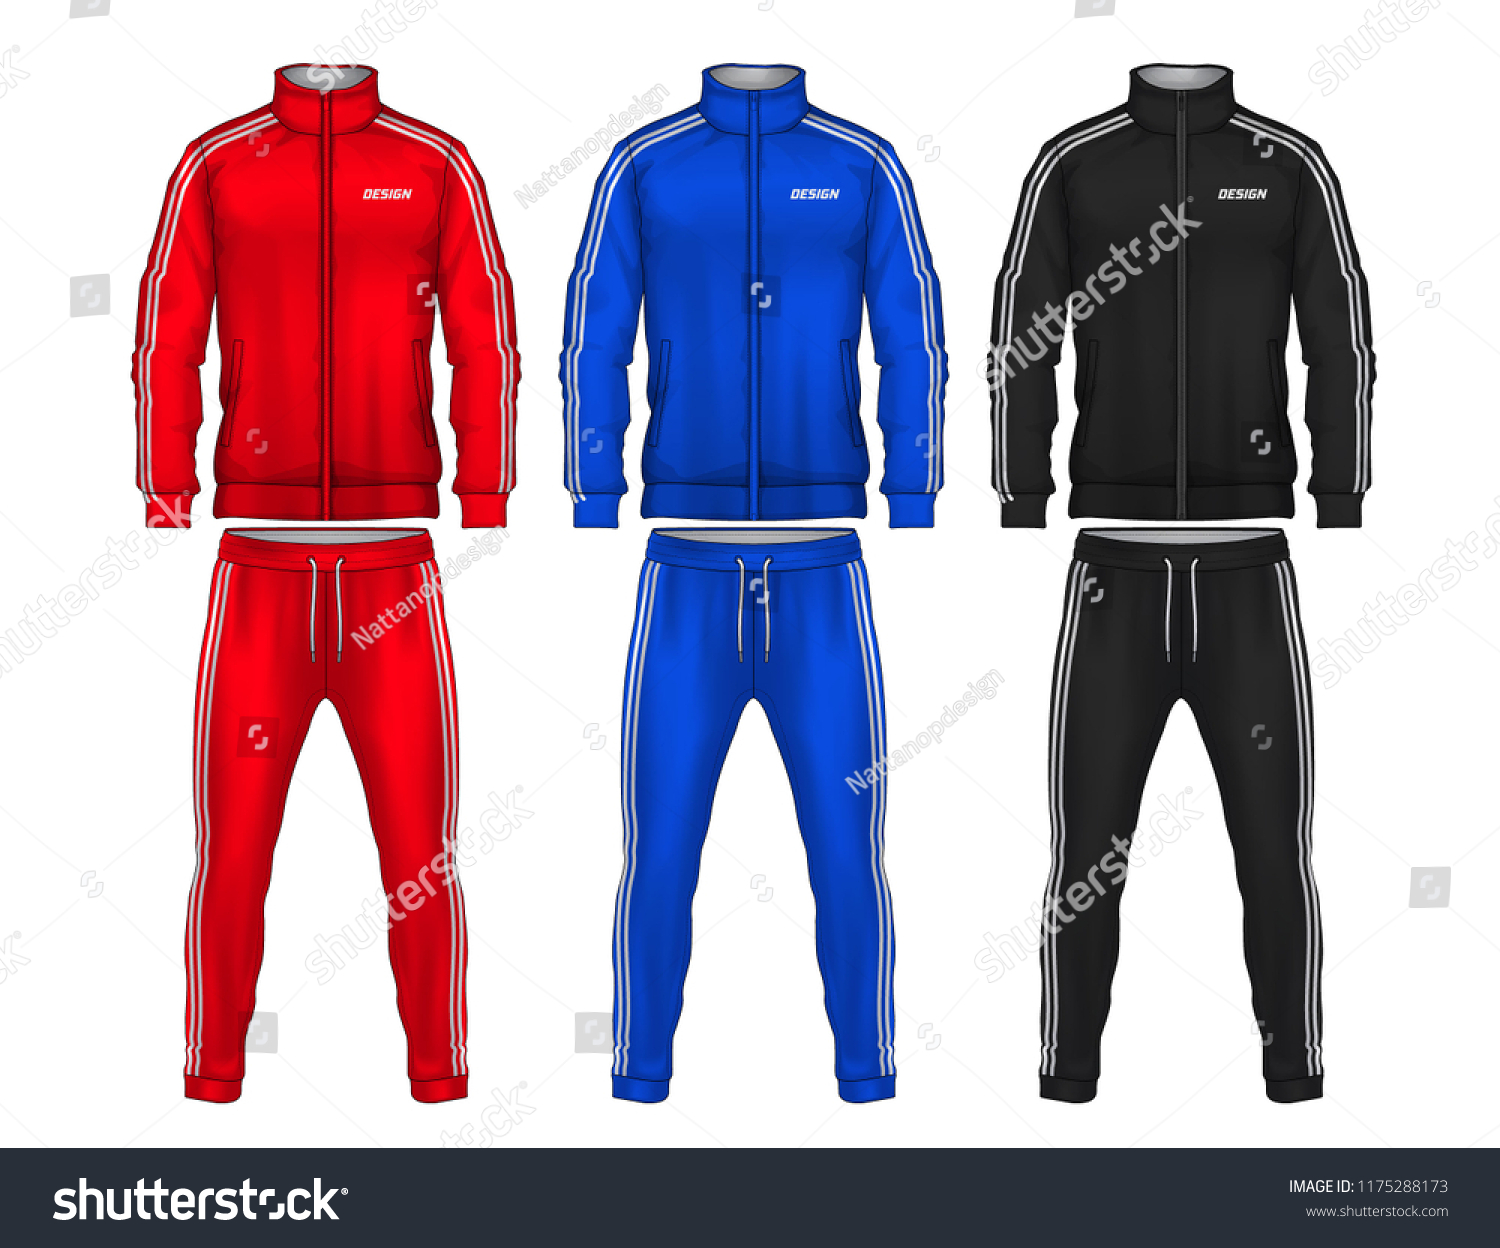 SVG of sport track suit design template,jacket and trousers vector illustration, svg